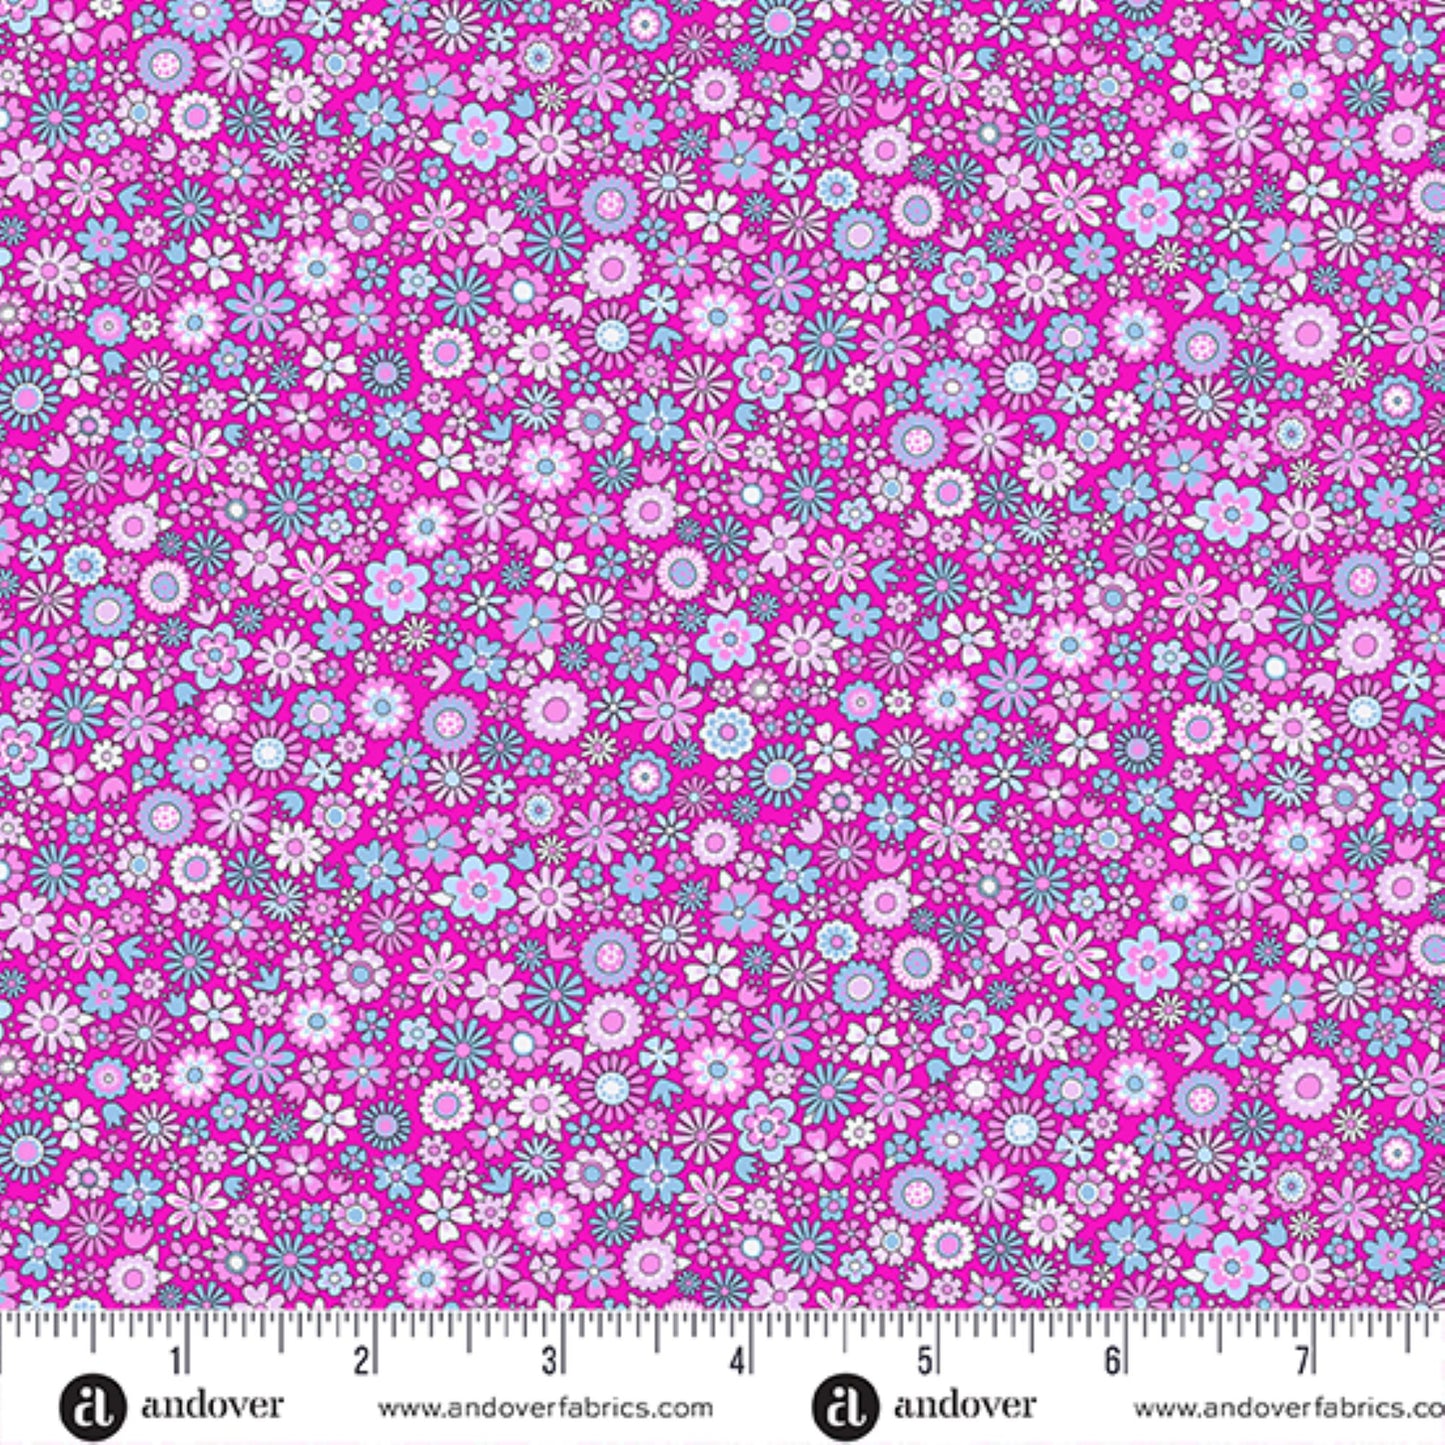 Country Cuttings florals pink lilac bundle - 6 Fat Quarters cotton quilt fabric by Makower UK